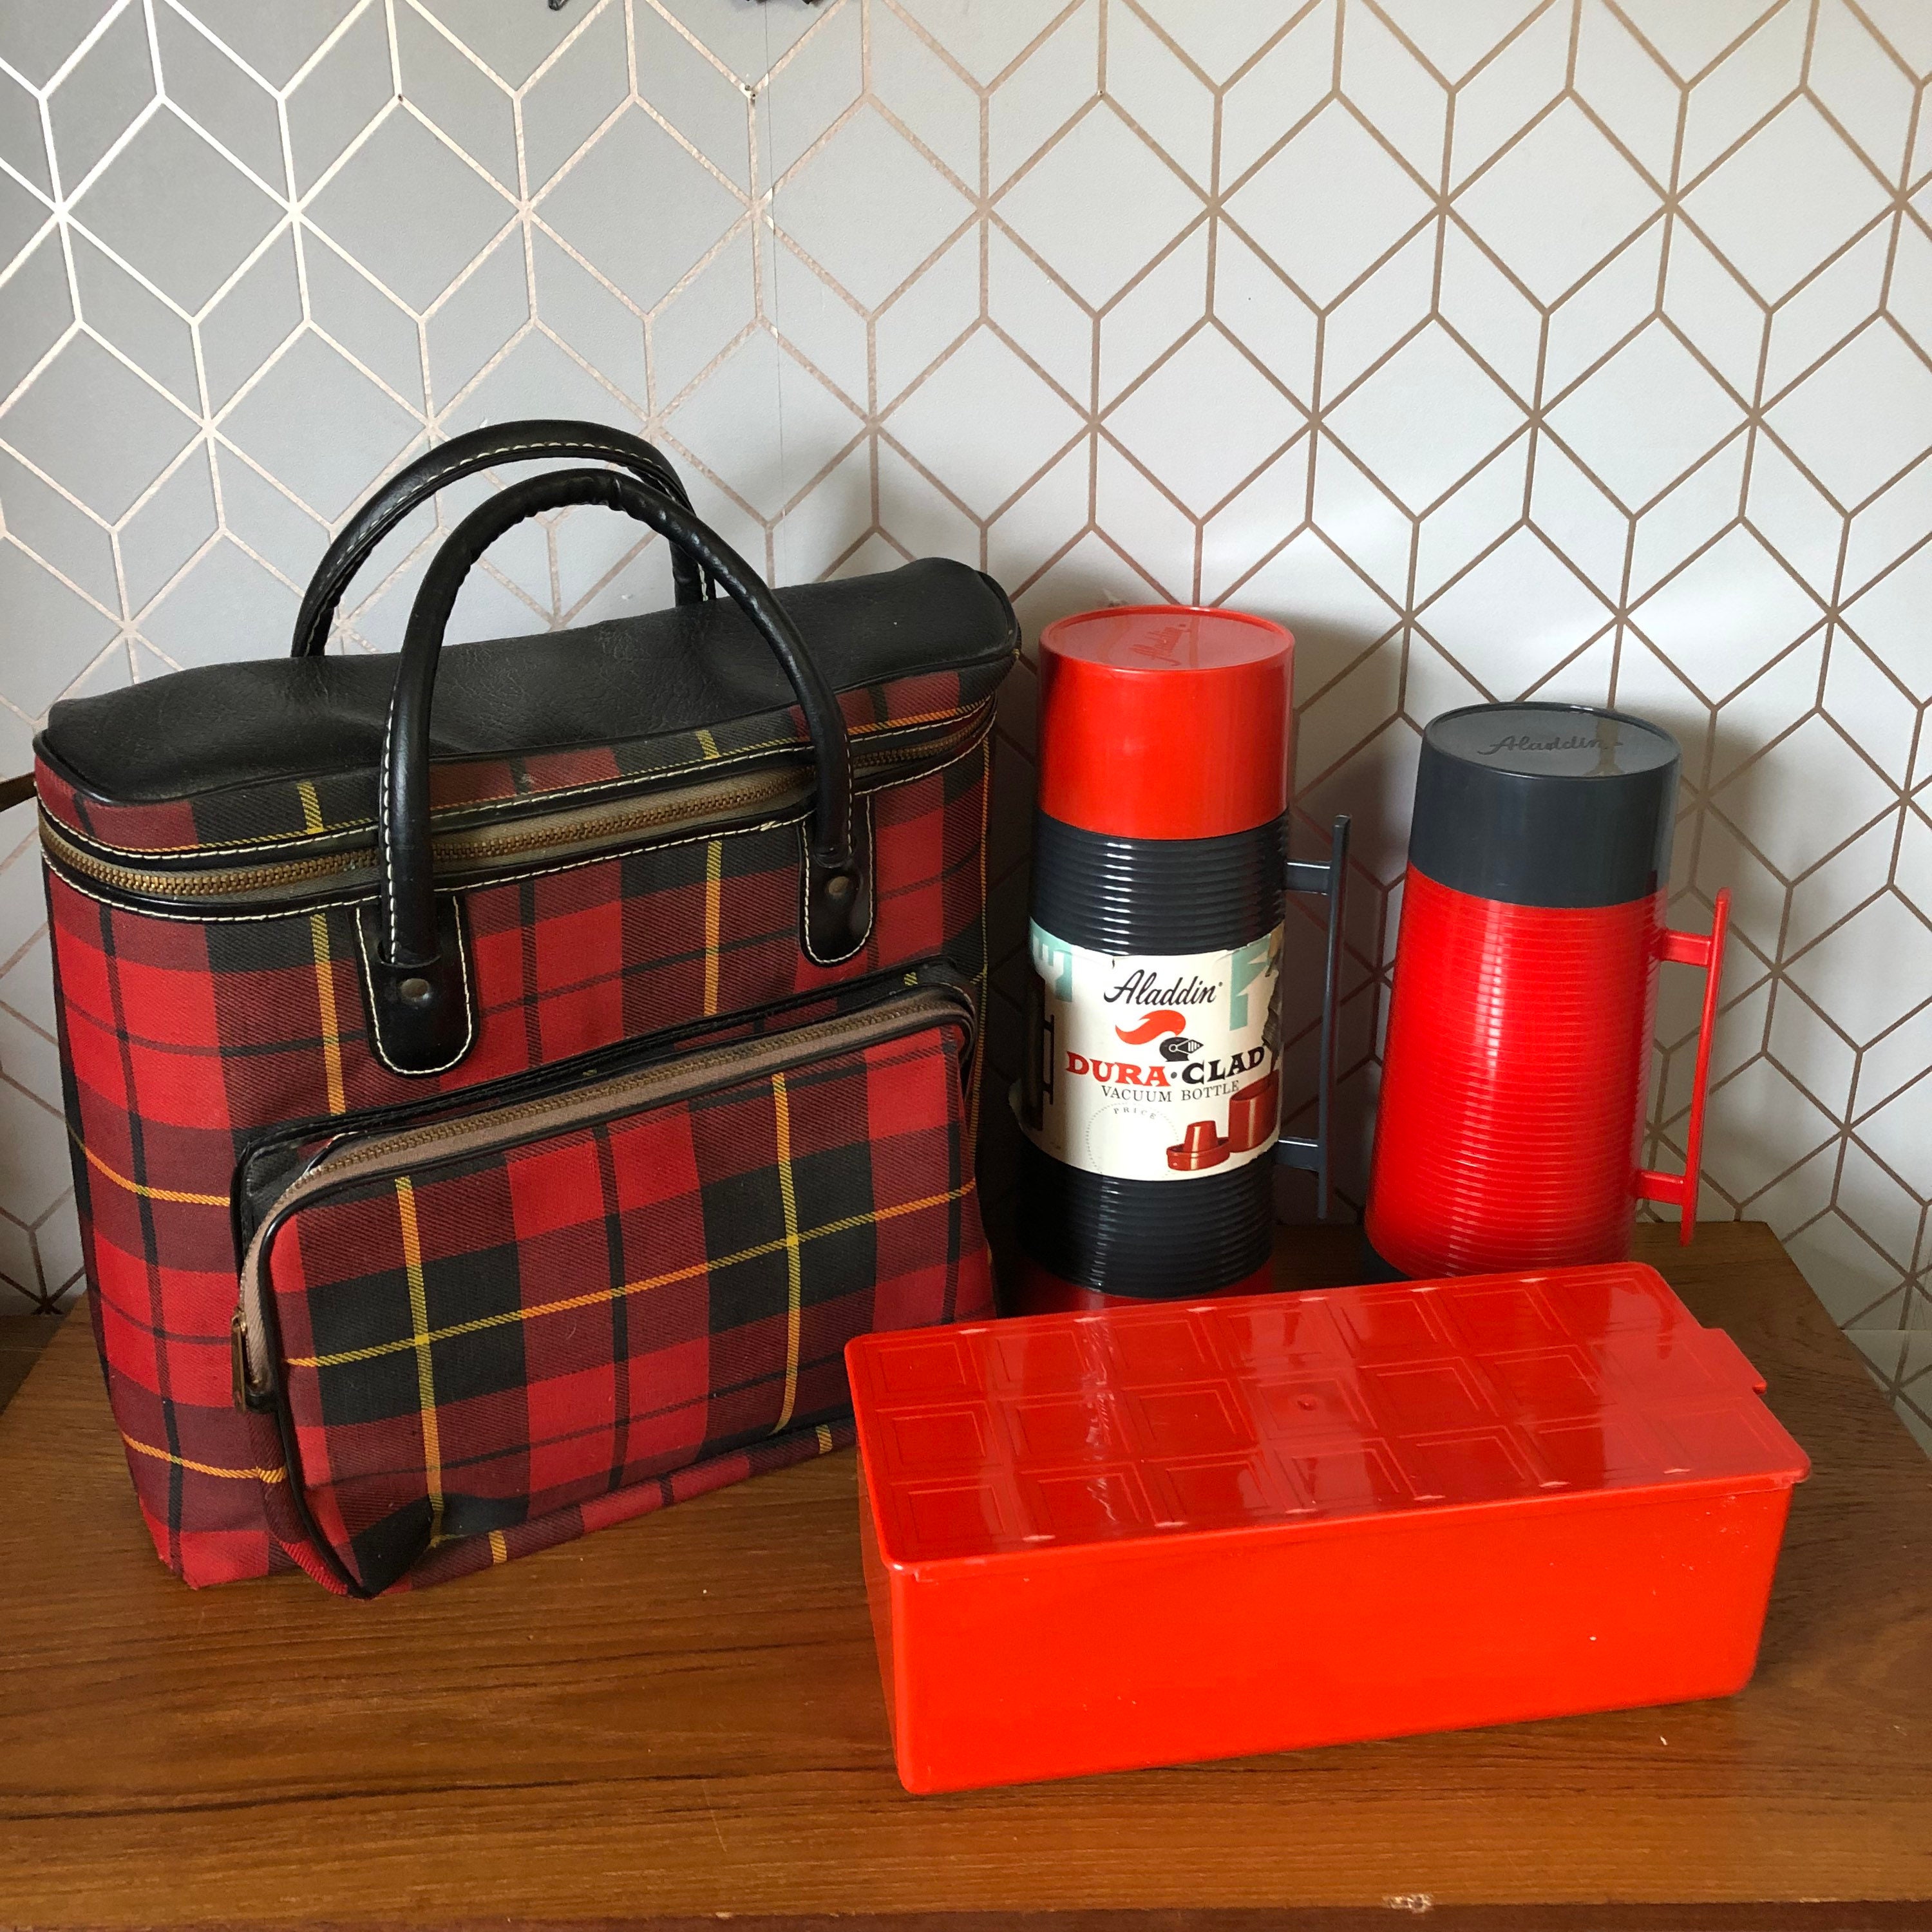 Vintage Louis Vuitton Monogram Tote with Thermos and Cup Picnic